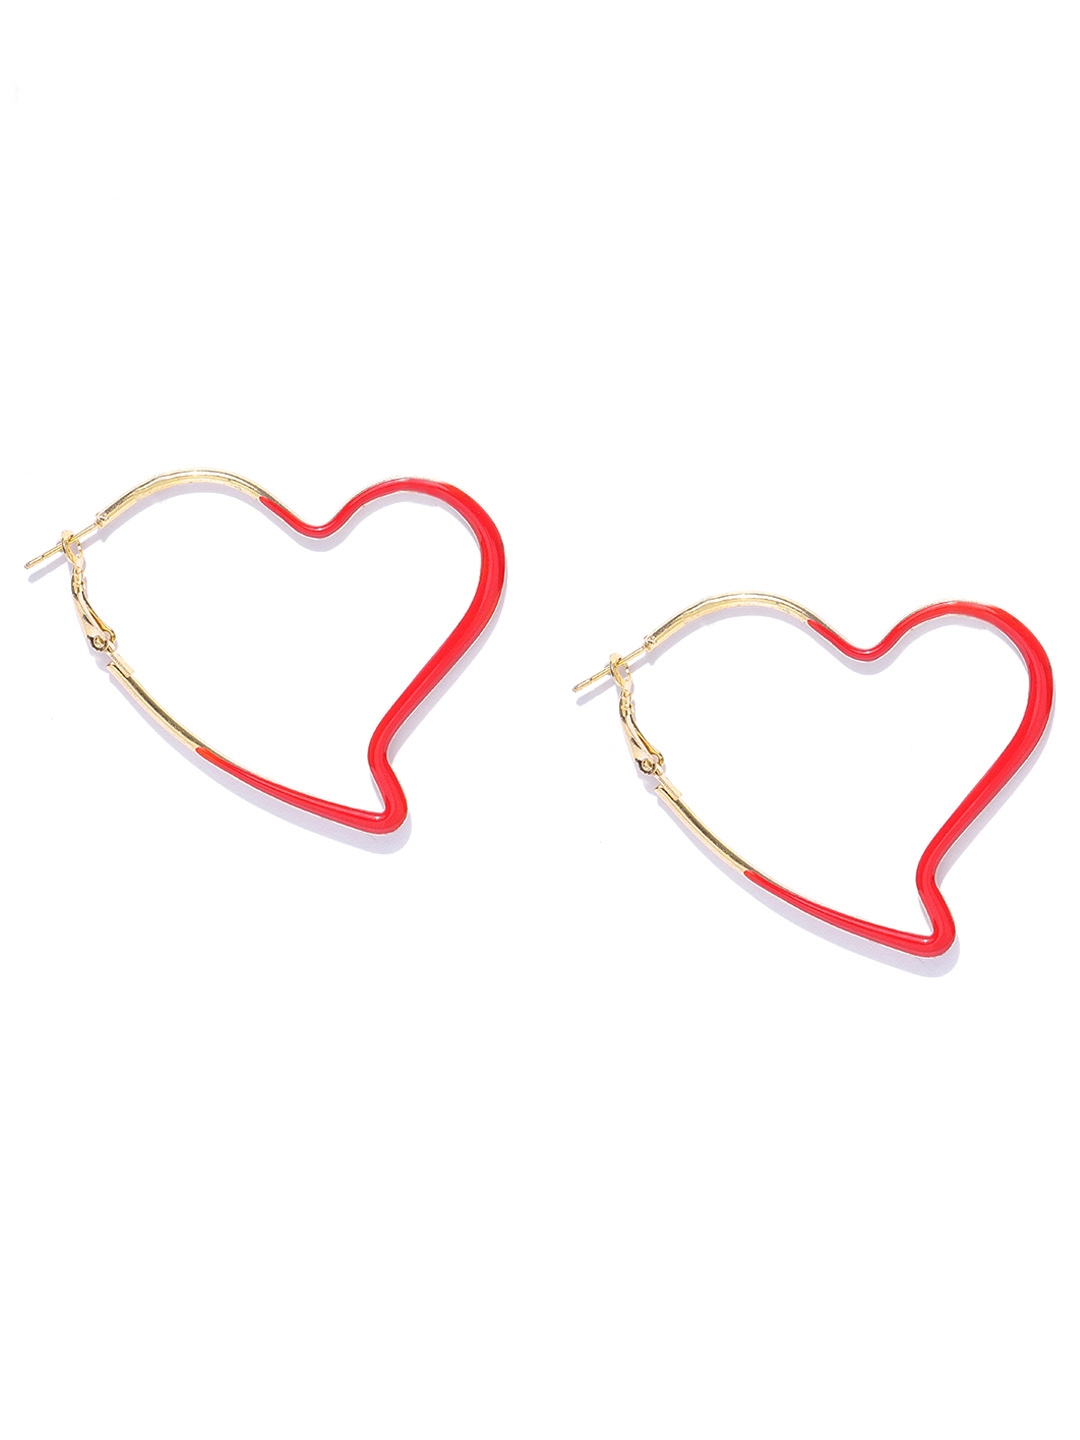 Jewels Galaxy Red Gold Plated Heart Shaped Handcrafted Hoop Earrings